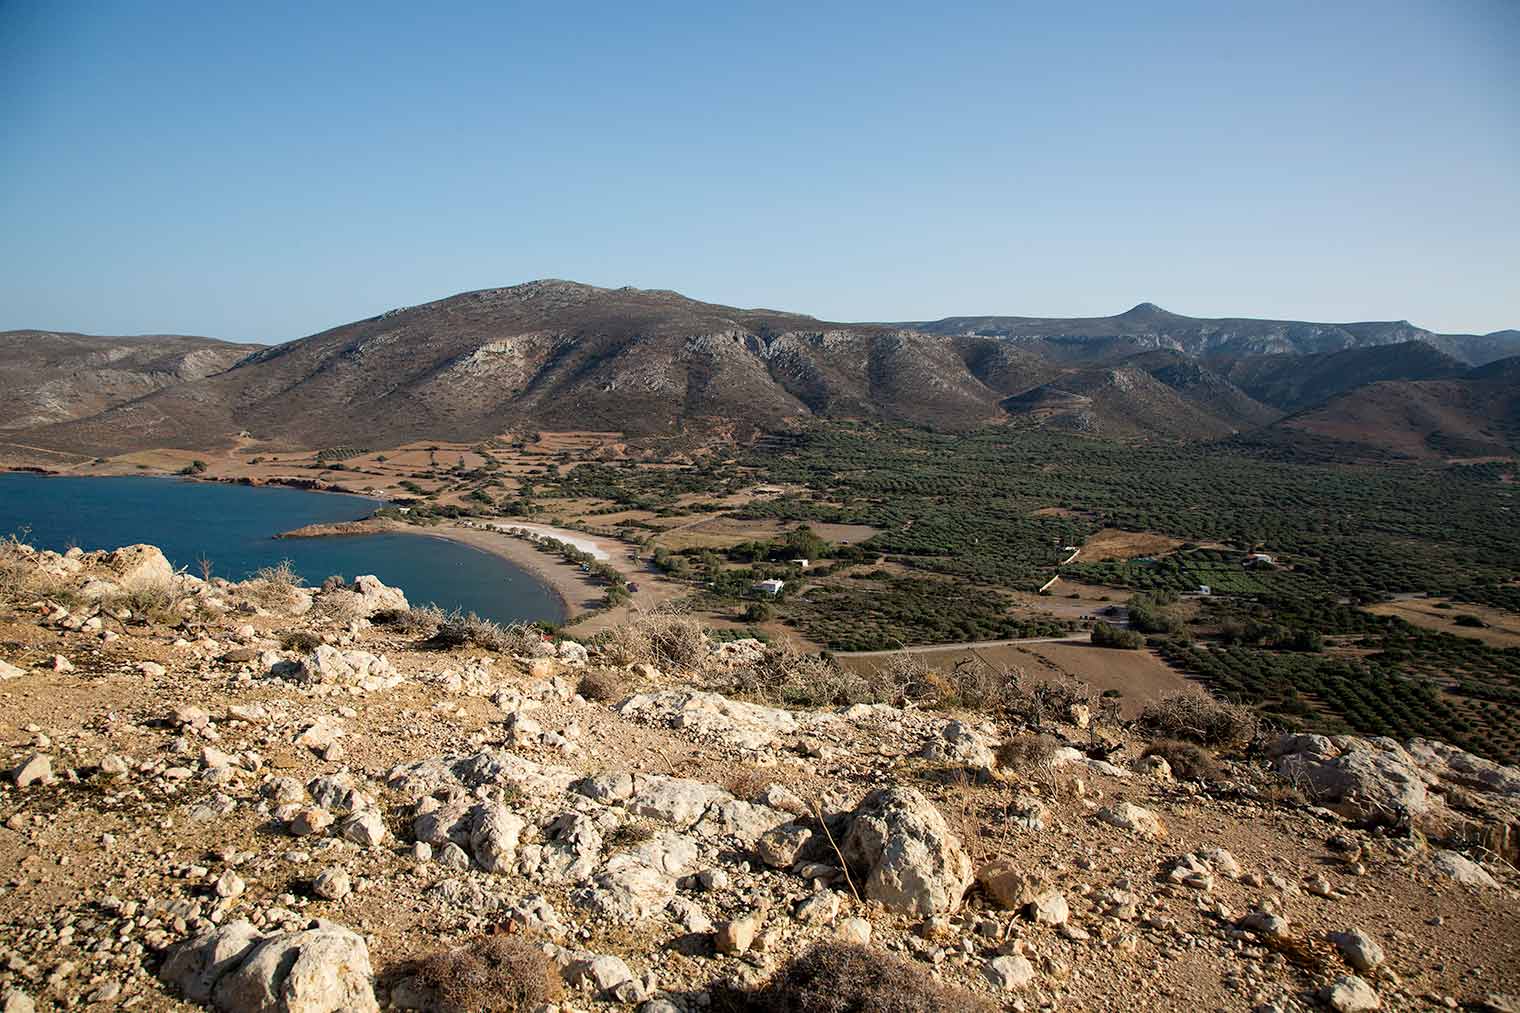 The Roussolakkos plain in eastern Crete viewed from the Kastri hill, with Mount Petsophas in the background